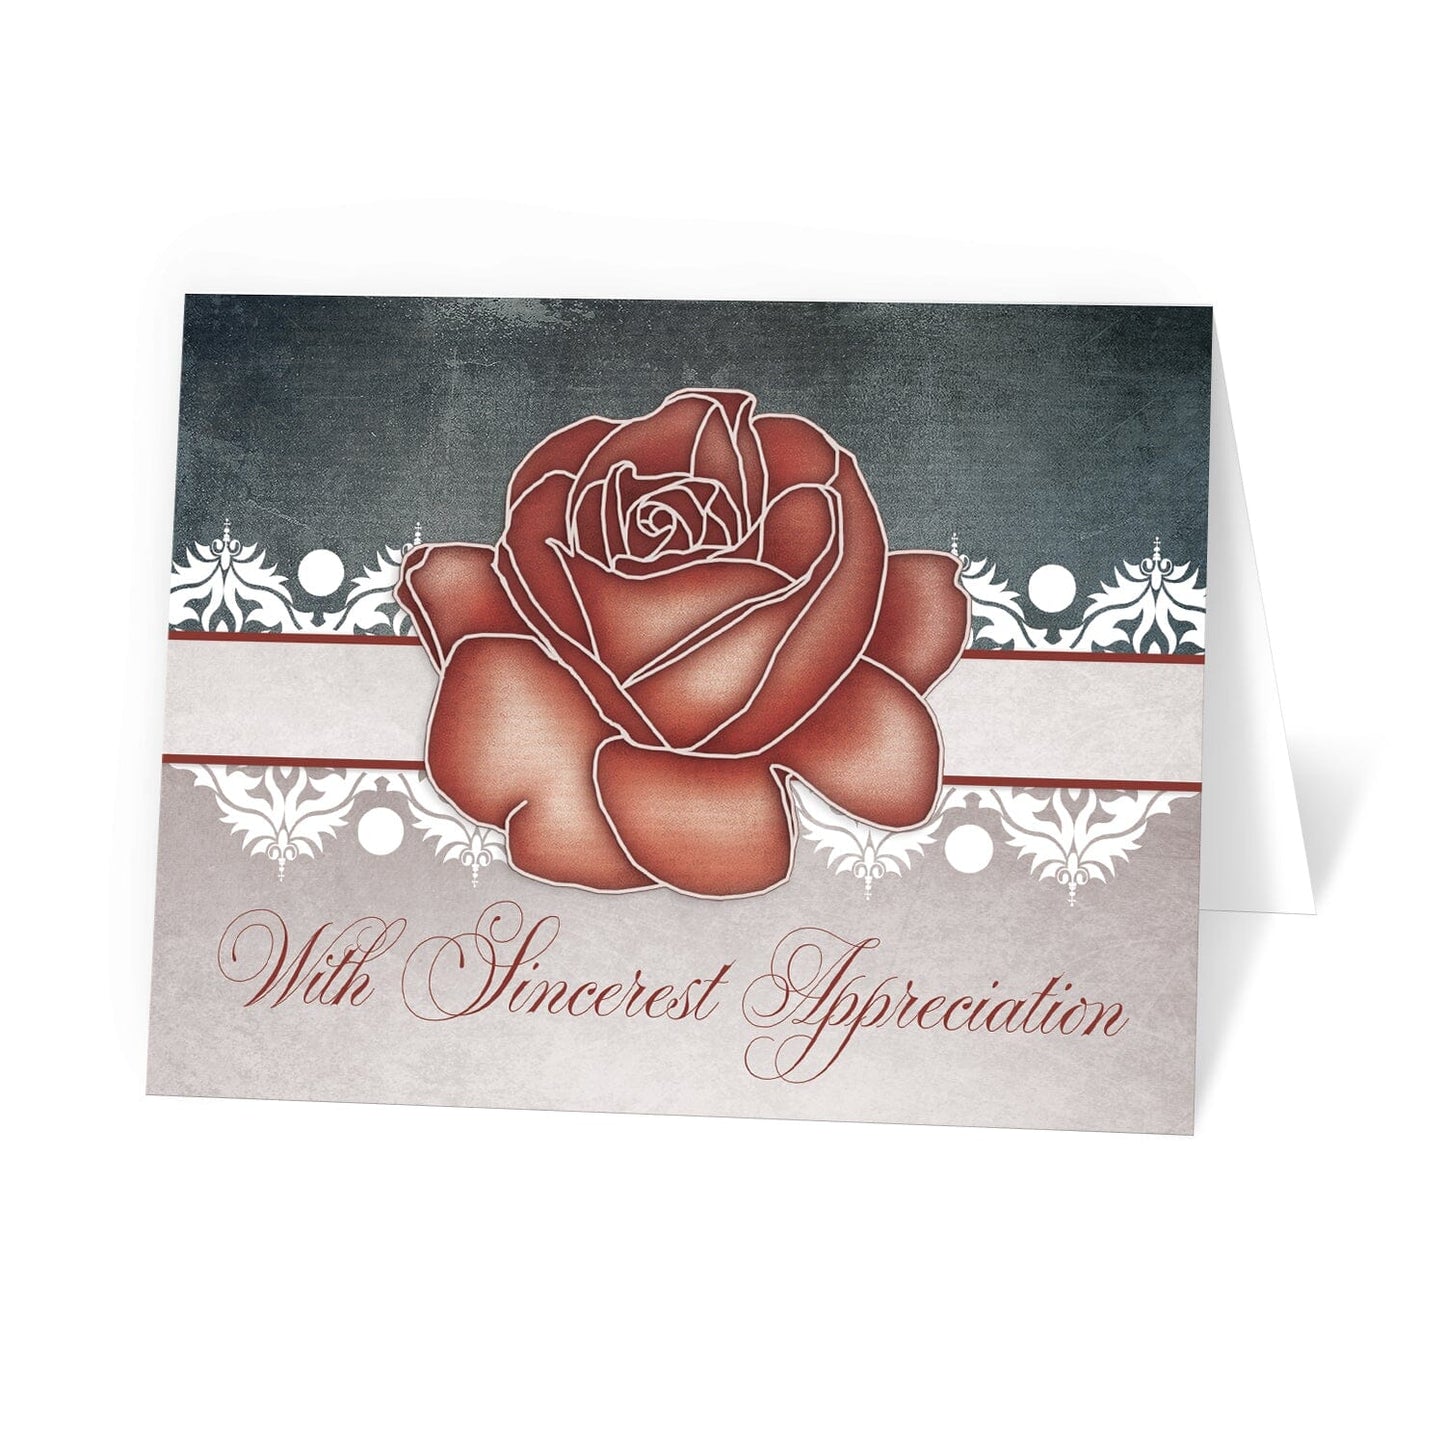 Vintage Rustic Country Rose Thank You Cards at Artistically Invited. Vintage rustic country rose thank you cards with a vintage rustic country style featuring a stylized artistic red rose over a stripe outlined in red and lined with white damask elements. The background is designed with a dark navy blue canvas texture illustration along the top and a beige vintage parchment illustration with the words "With Sincerest Appreciation" printed in a fancy dark red script font along the bottom.